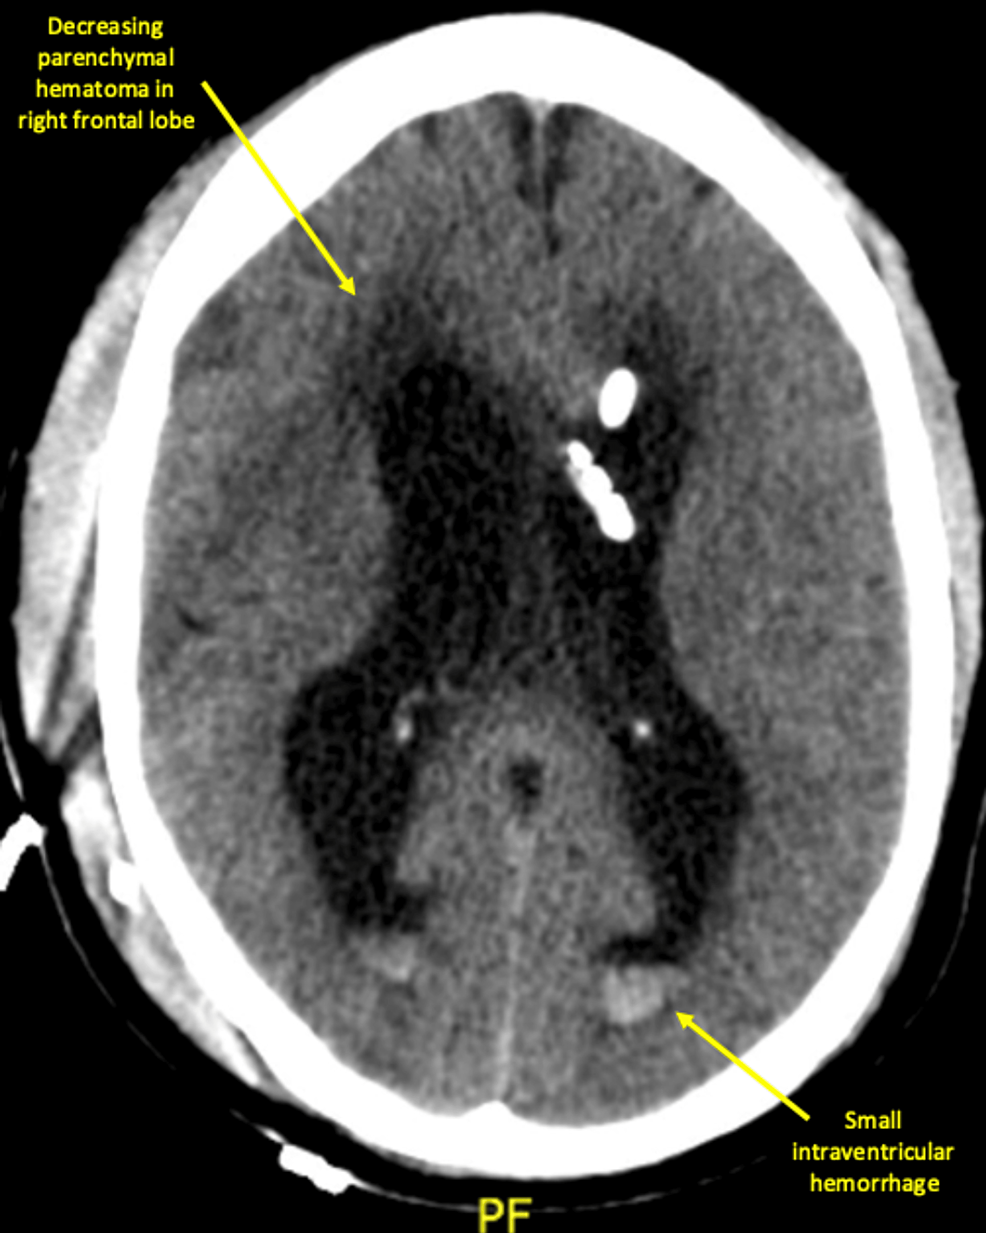 CT-head-without-contrast-on-day-3-of-the-first-readmission-showed-a-decreasing-parenchymal-hematoma-in-the-right-frontal-lobe-adjacent-to-the-shunt-catheter-but-only-a-minimal-decrease-in-size-in-the-lateral-and-third-ventricles.-There-was-also-a-small-amount-of-intraventricular-hemorrhage-and-a-small-amount-of-pneumocephalus.-